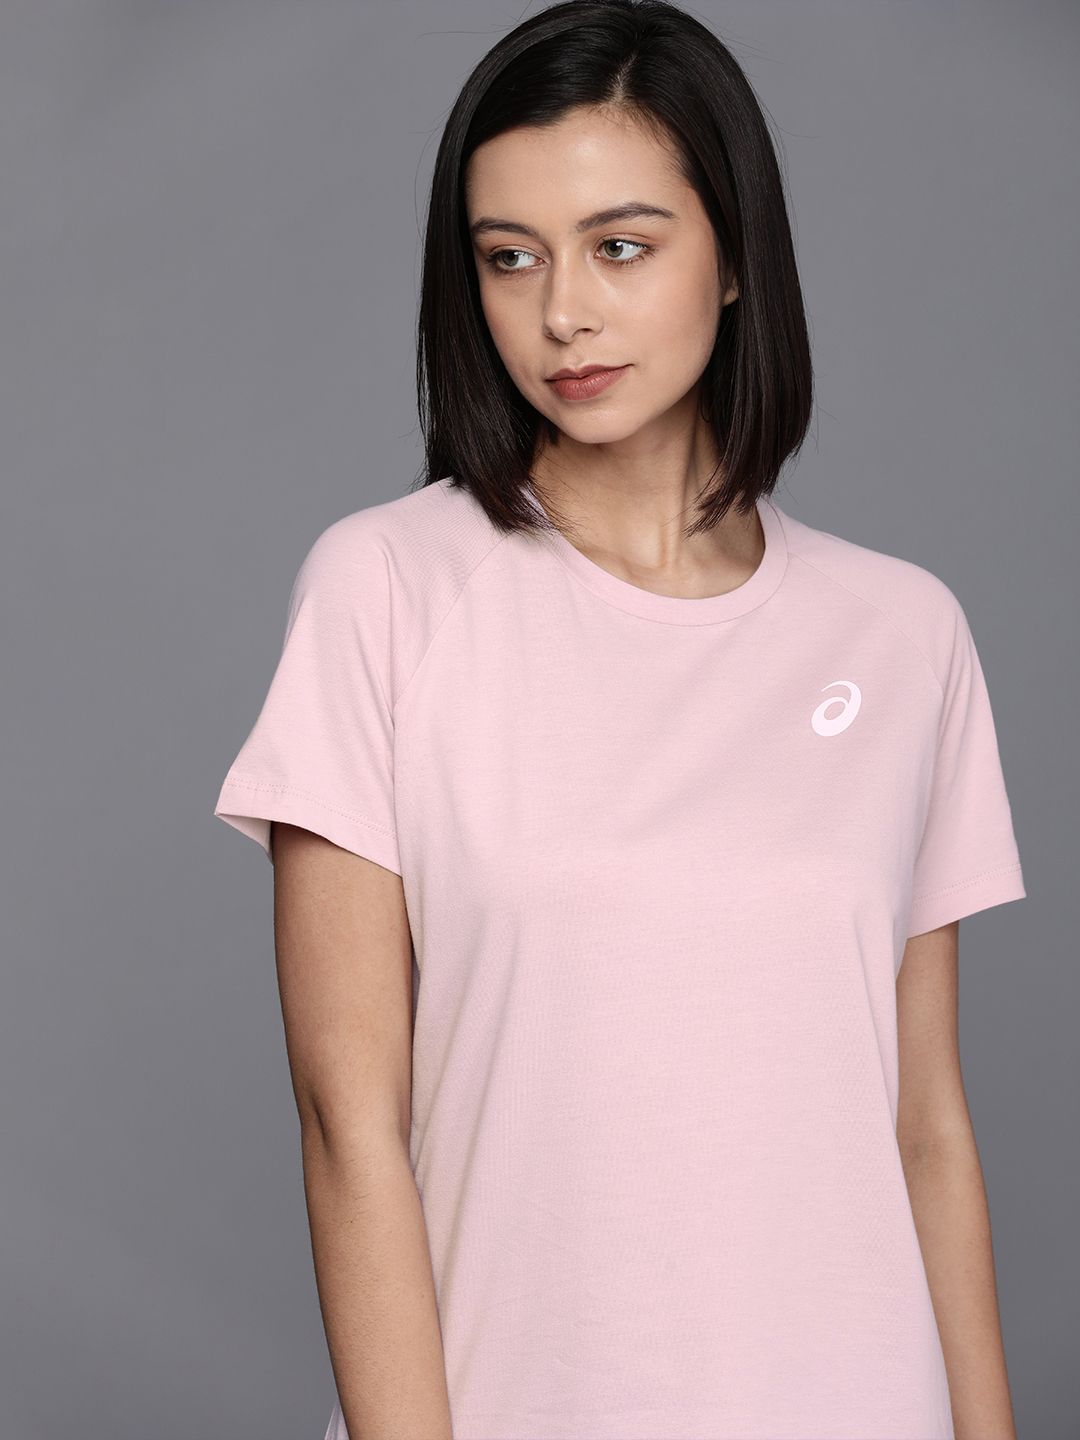 ASICS Women Pink Solid Pure Cotton T-shirt Price in India